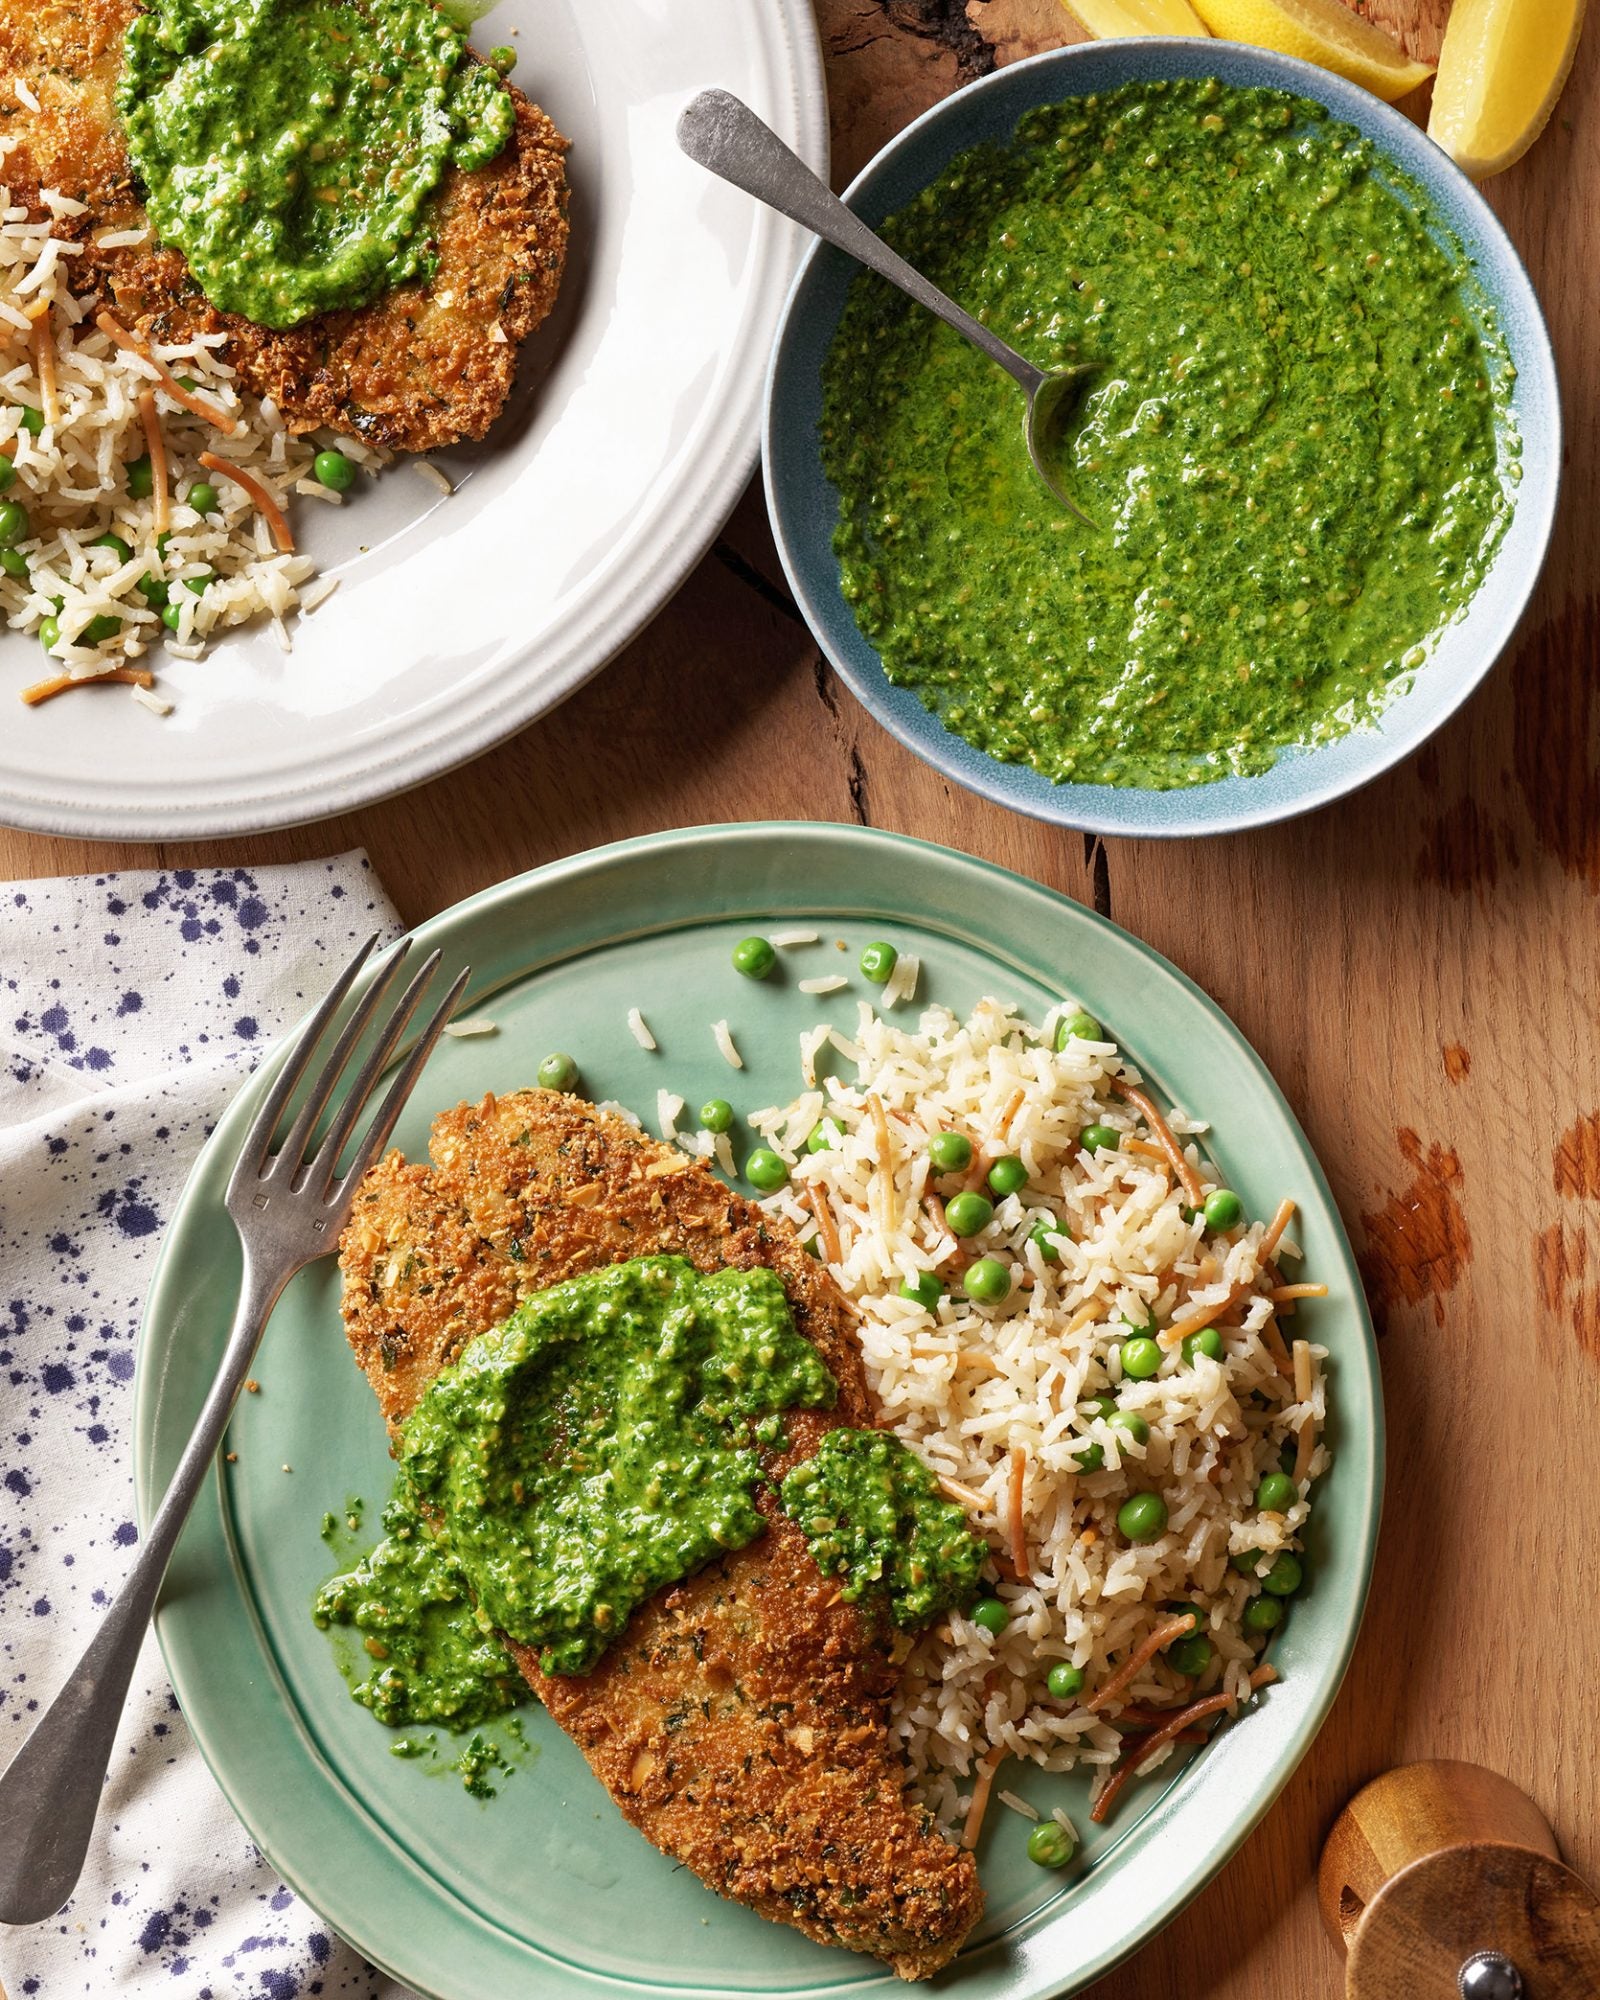 Almond-Crusted Sole with Chard Pesto & Rice Pilaf with Peas